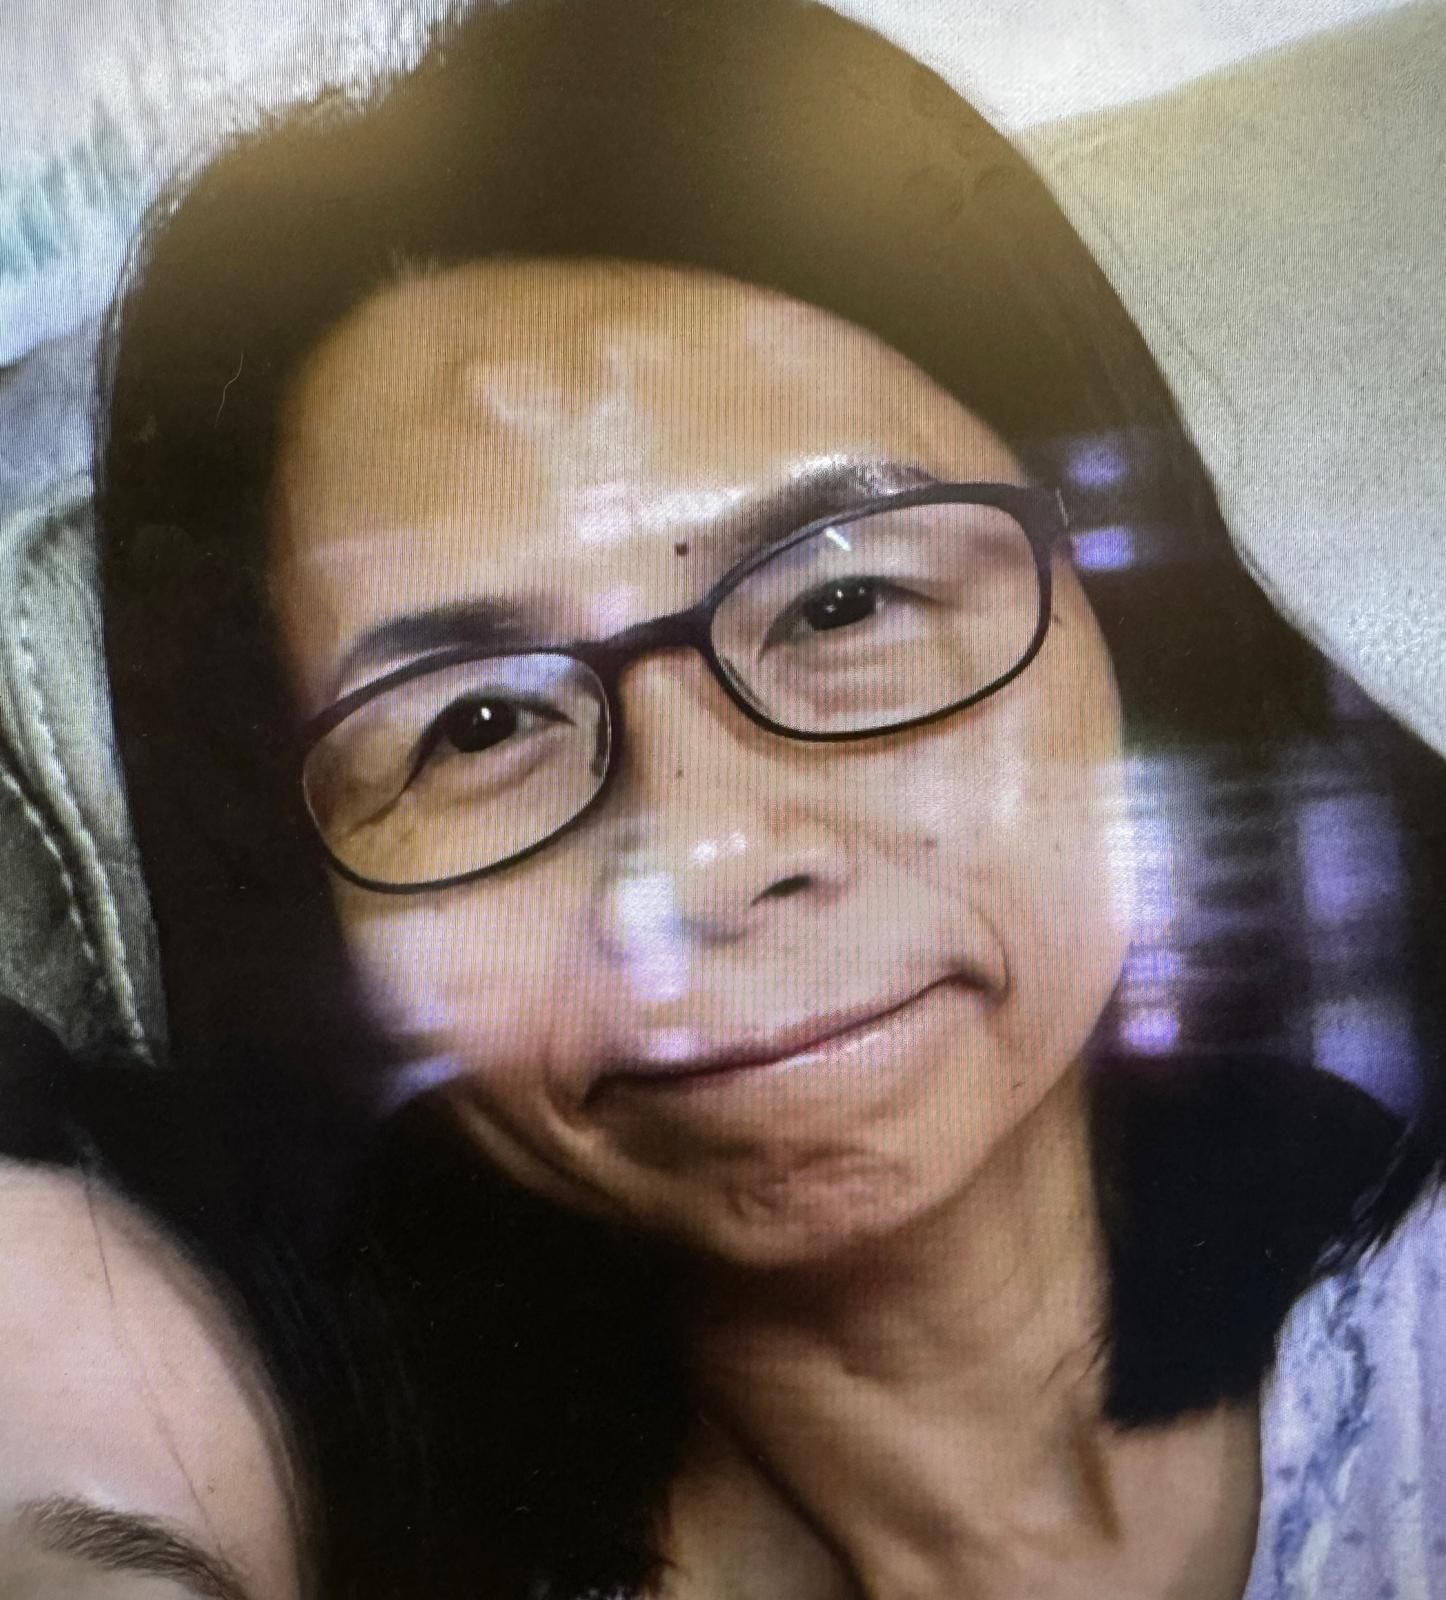 Tang Oi-yee, aged 57, is about 1.5 metres tall, 41 kilograms in weight and of thin build. She has a pointed face with yellow complexion and short straight black hair. She was last seen wearing black glasses, a black mask, a black jacket, blue jeans, black sports shoes and carrying a black bag.